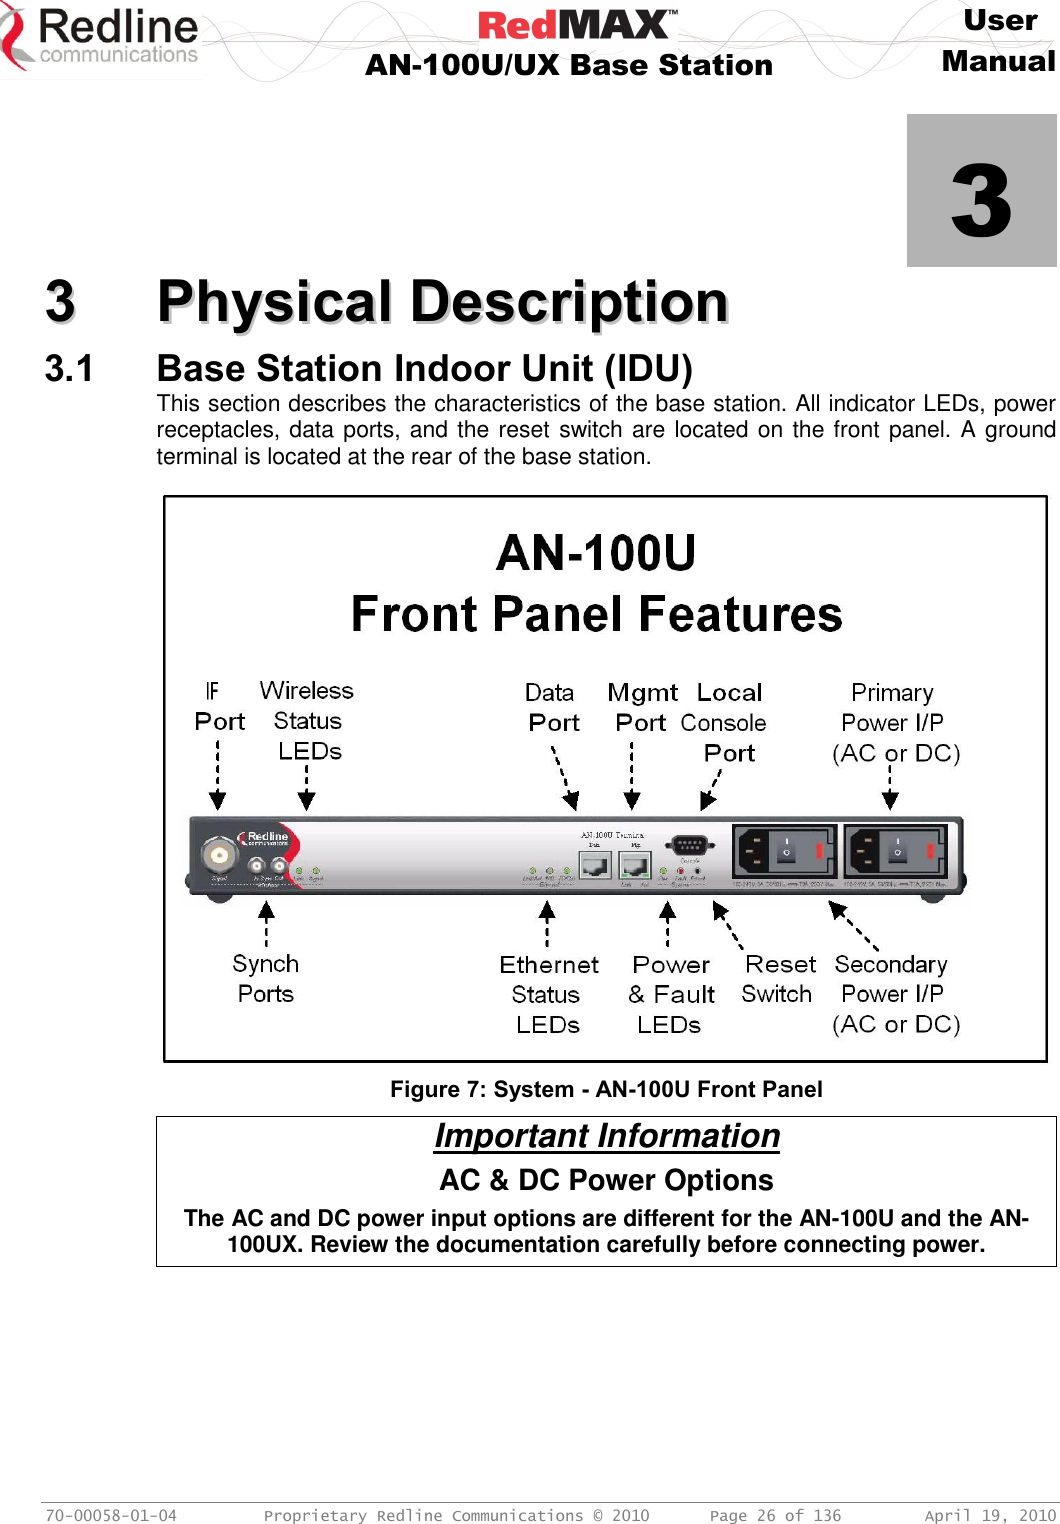     User  AN-100U/UX Base Station Manual   70-00058-01-04  Proprietary Redline Communications © 2010   Page 26 of 136  April 19, 2010            3 33  PPhhyyssiiccaall  DDeessccrriippttiioonn  3.1 Base Station Indoor Unit (IDU) This section describes the characteristics of the base station. All indicator LEDs, power receptacles, data ports, and the reset switch are located on the front panel. A ground terminal is located at the rear of the base station.   Figure 7: System - AN-100U Front Panel Important Information AC &amp; DC Power Options The AC and DC power input options are different for the AN-100U and the AN-100UX. Review the documentation carefully before connecting power.  